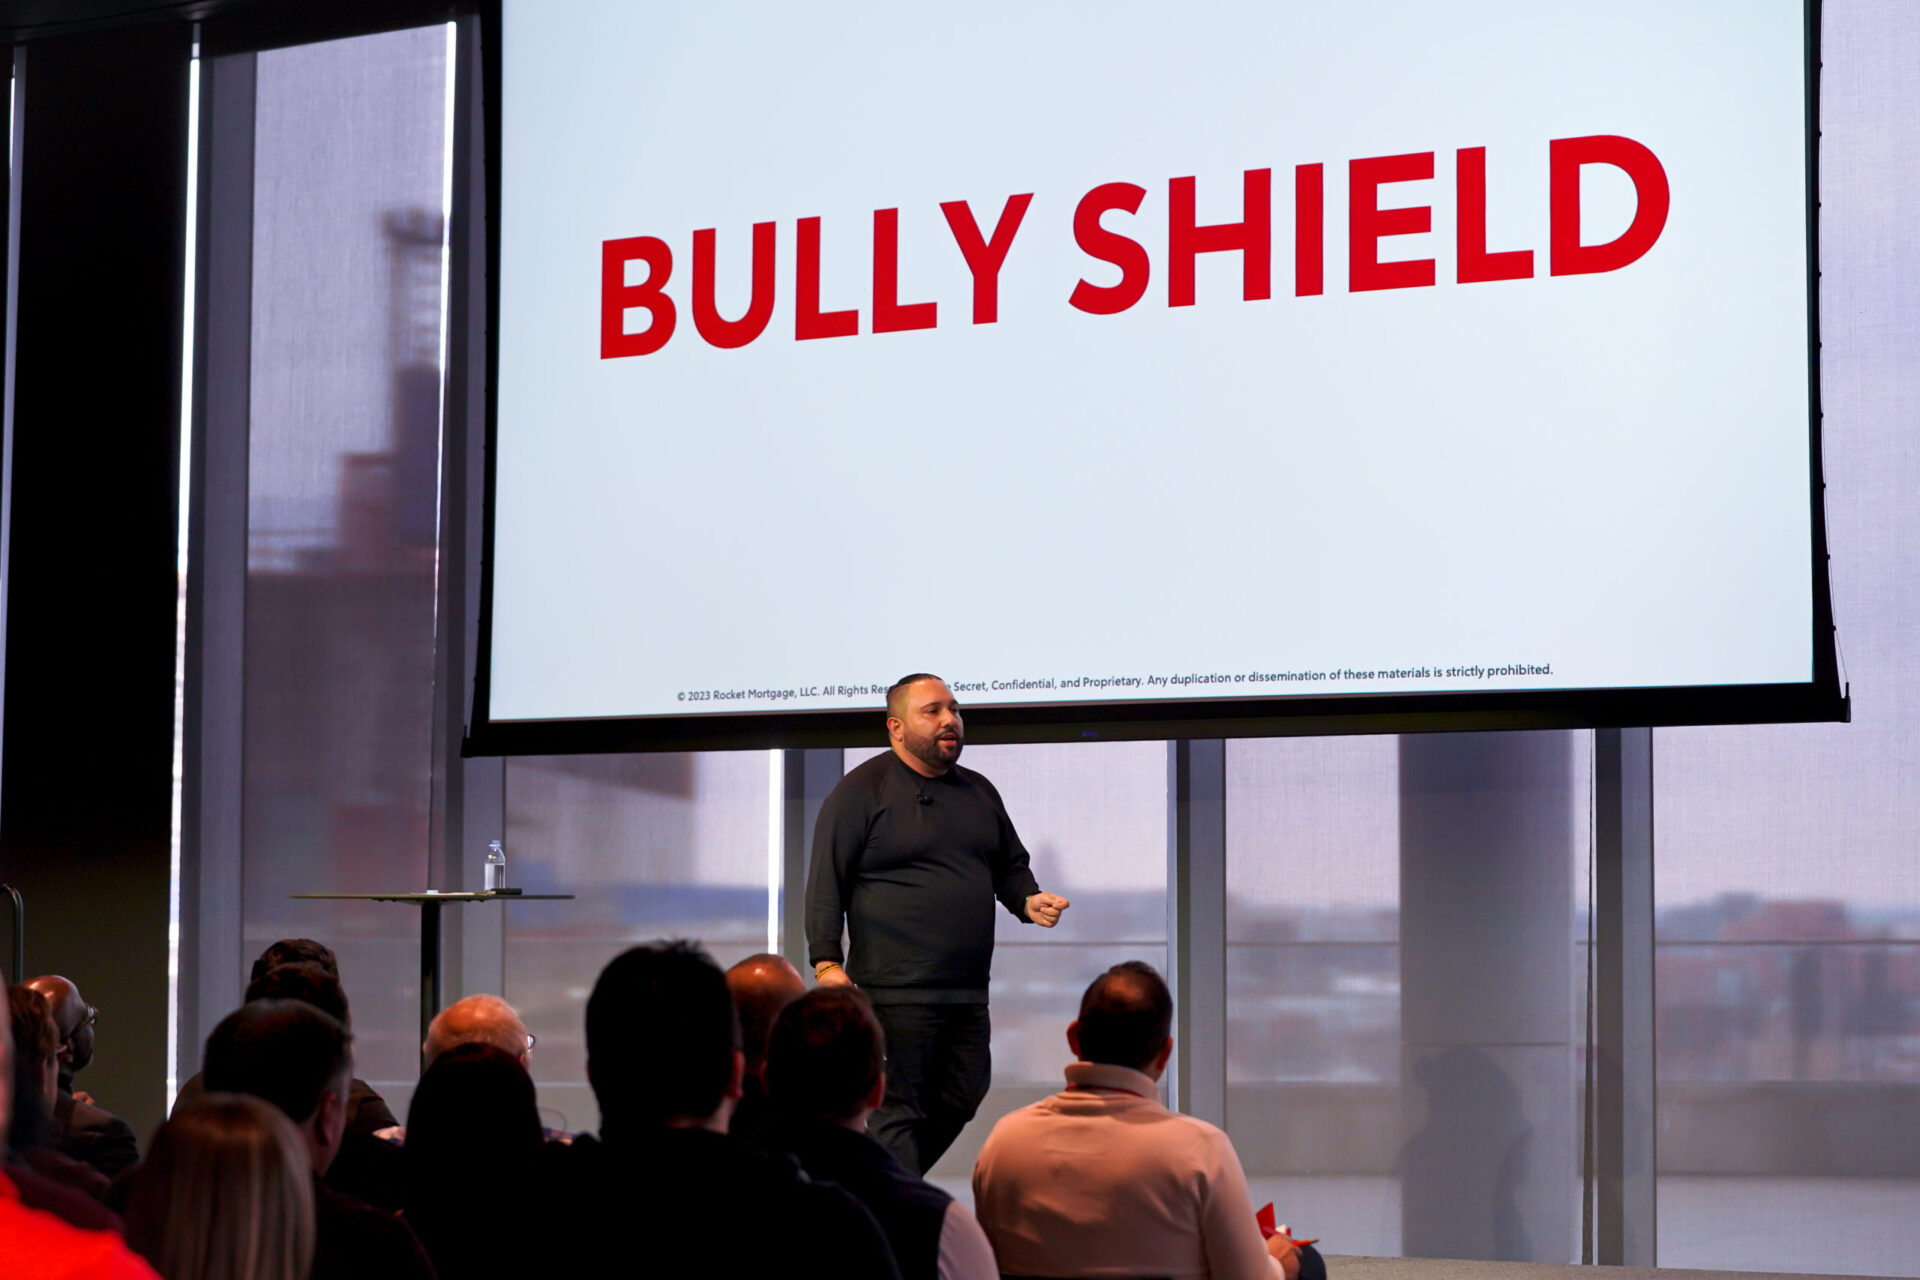 Rocket Pro TPO Takes Aim At UWM Ultimatum With “Bully Shield”